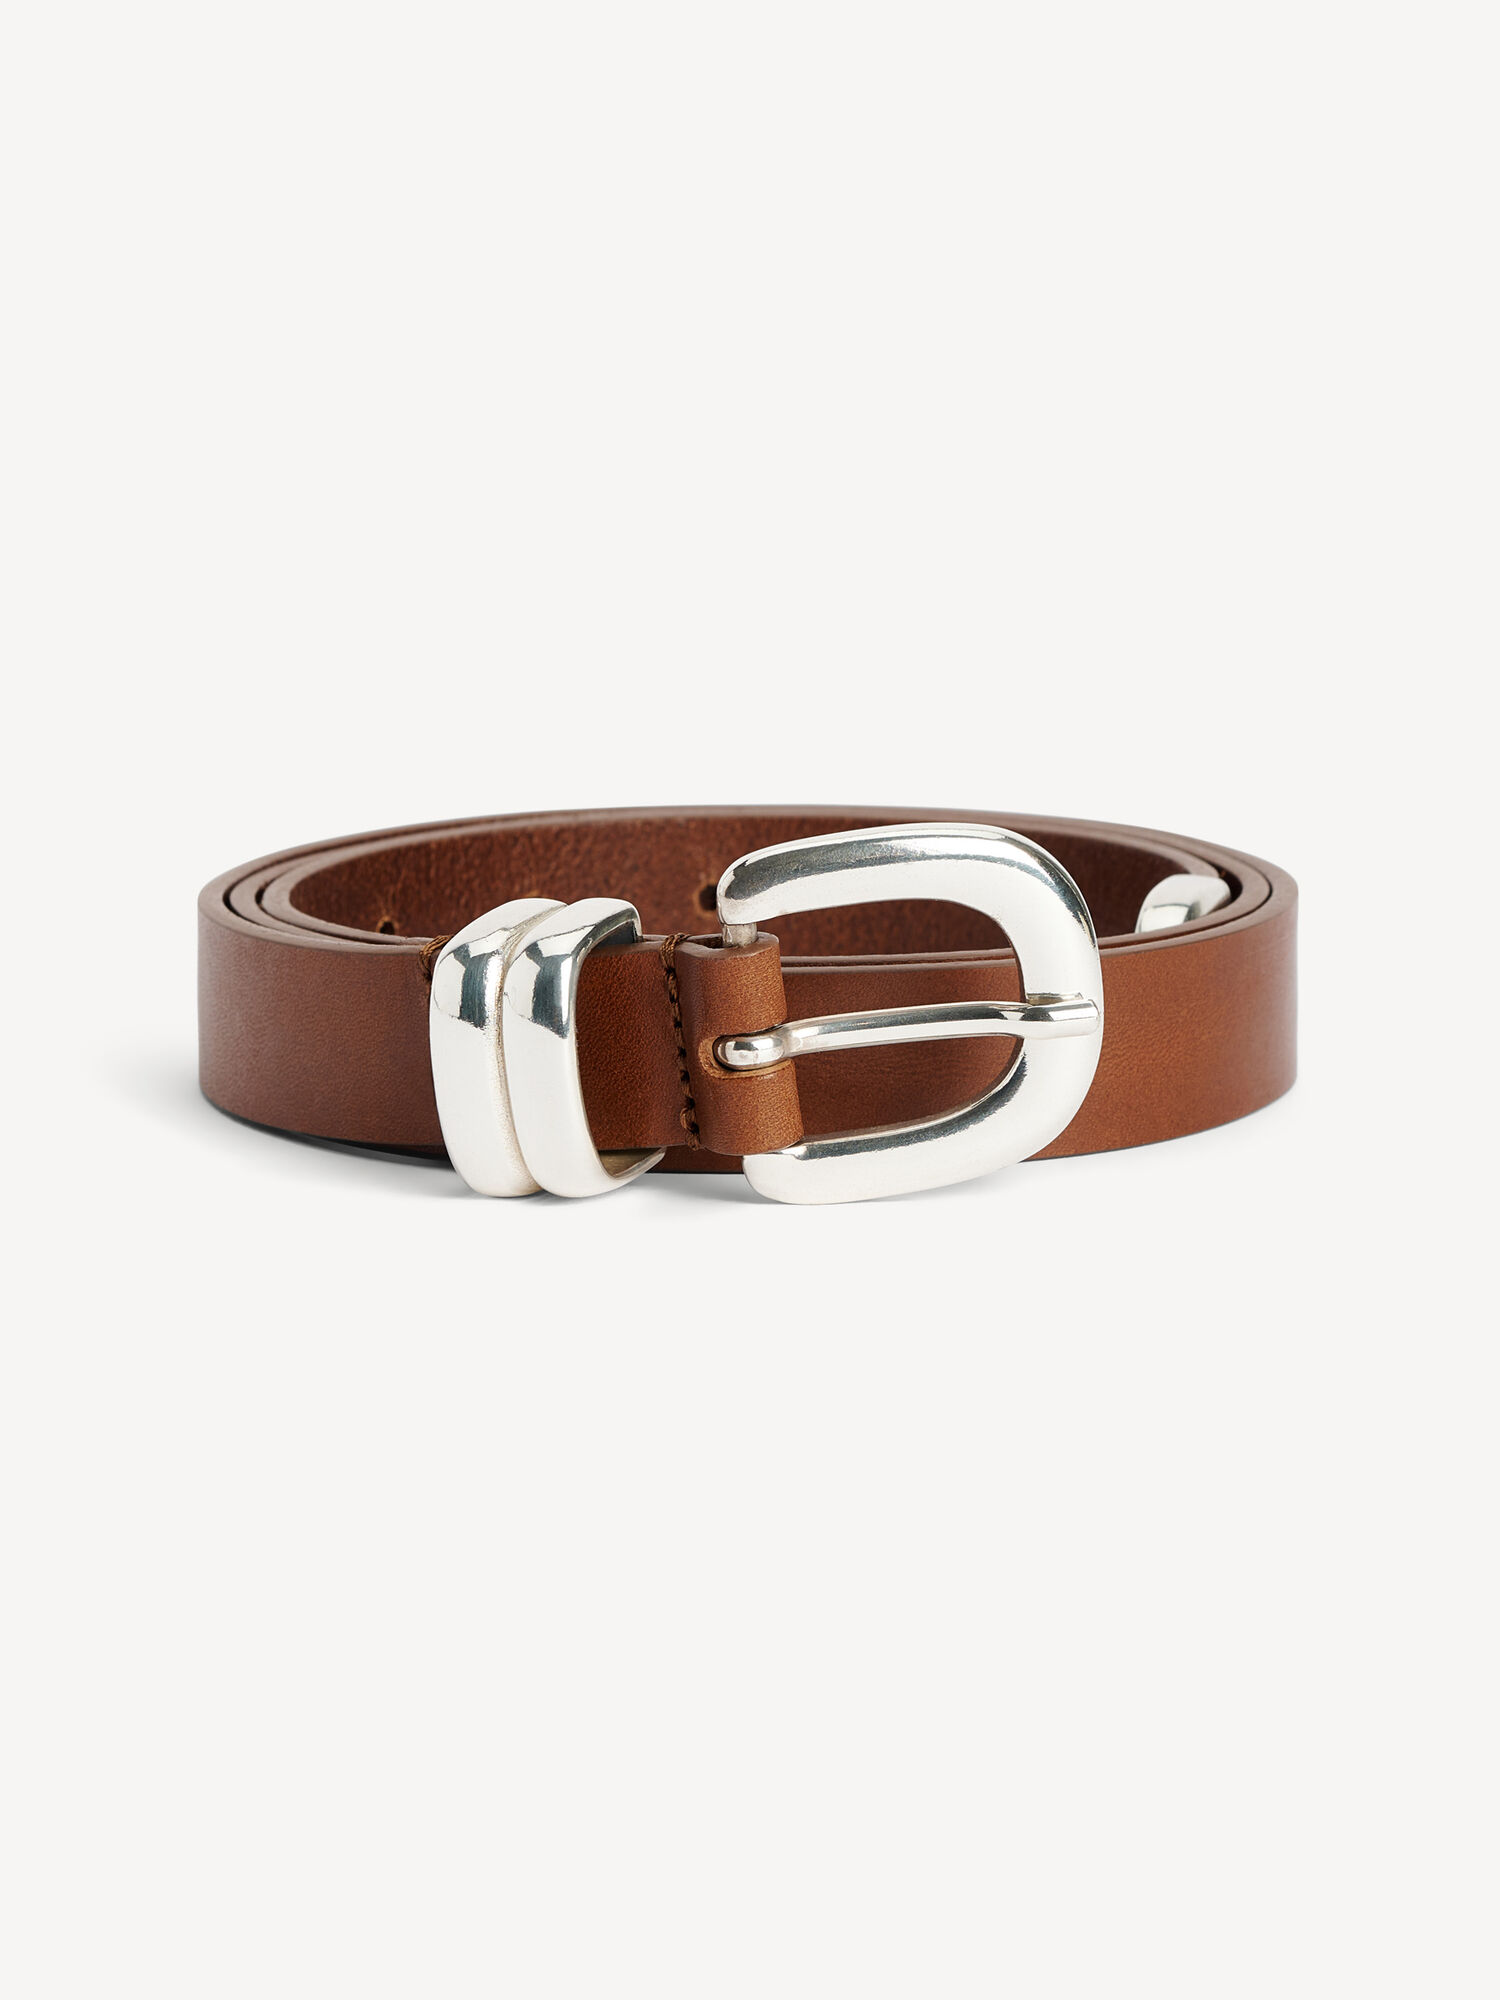 Zoilo leather belt